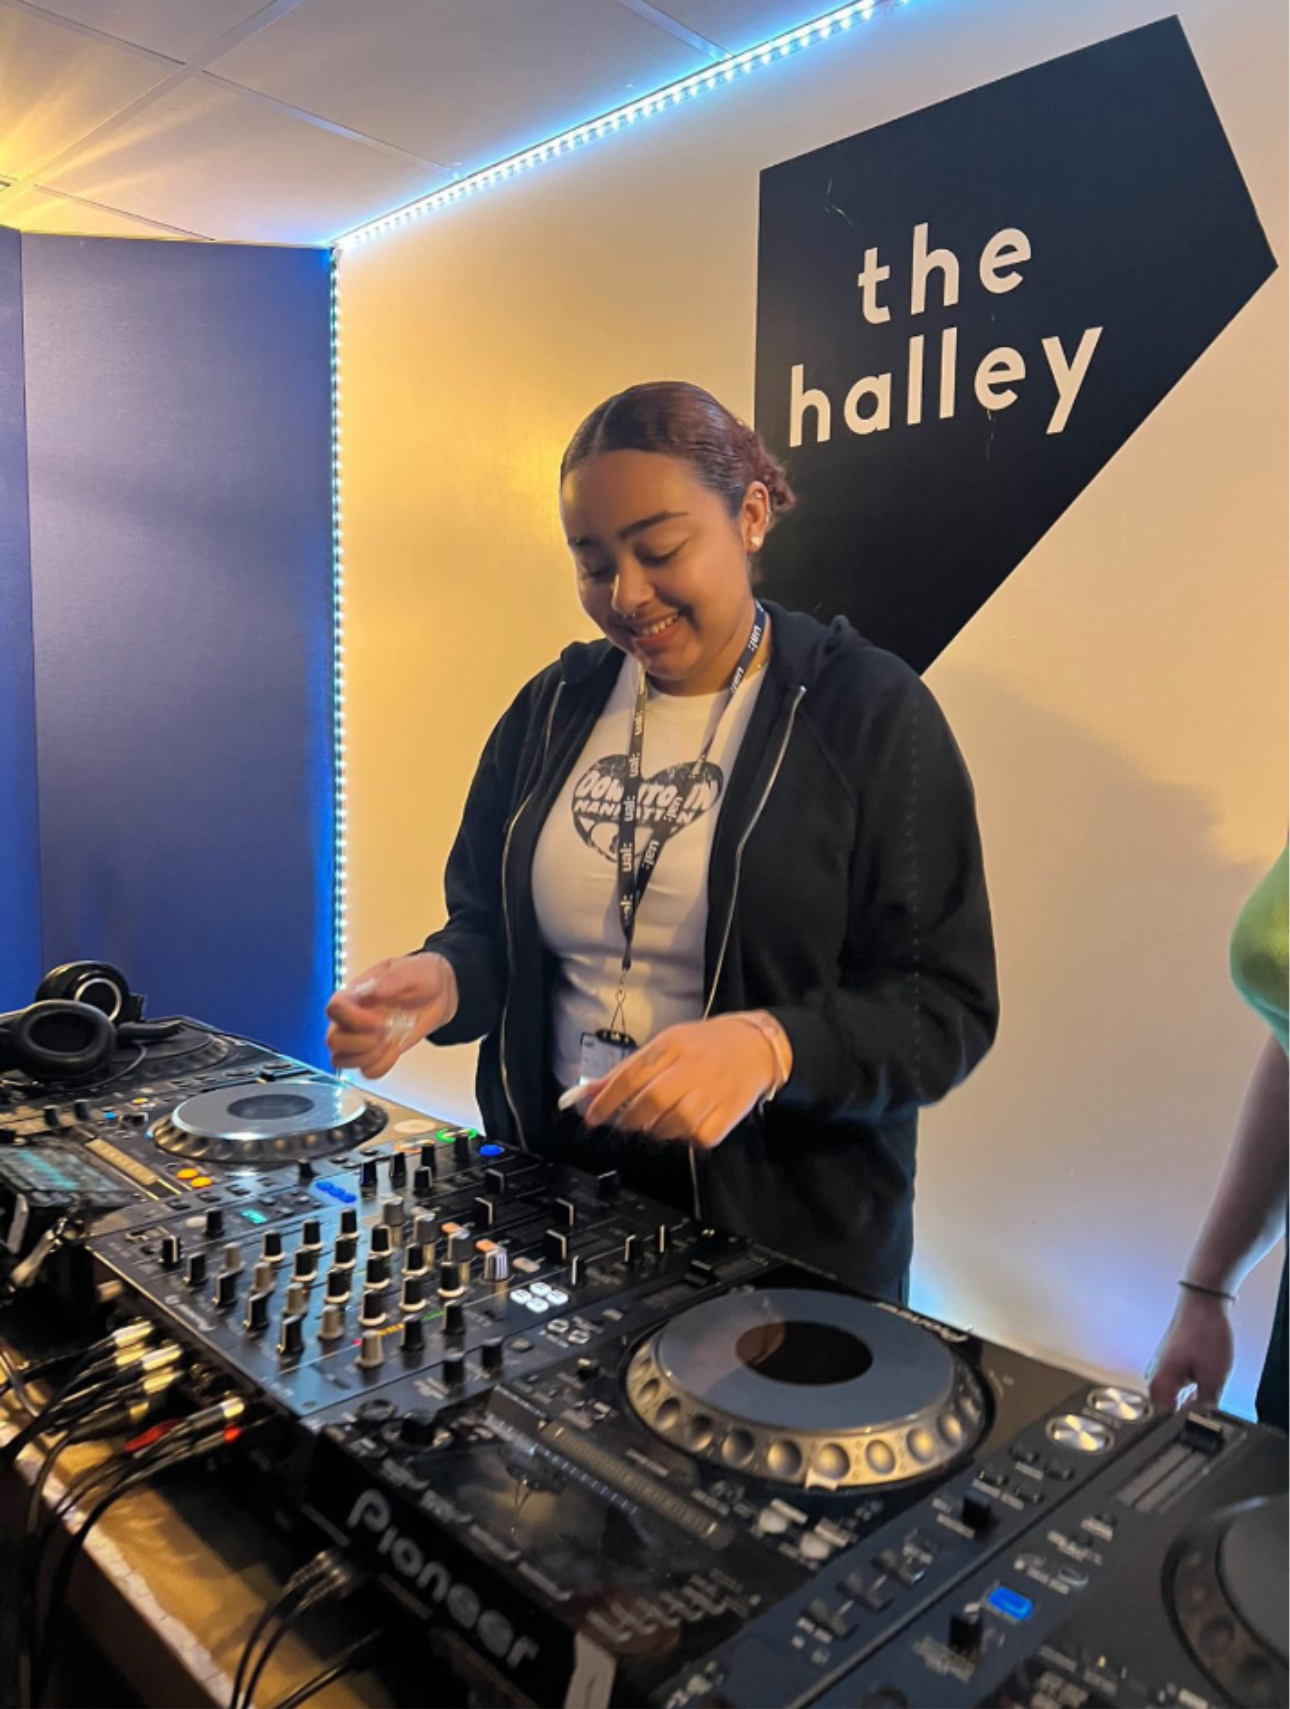 DJing introductory session @ ‘The Halley’